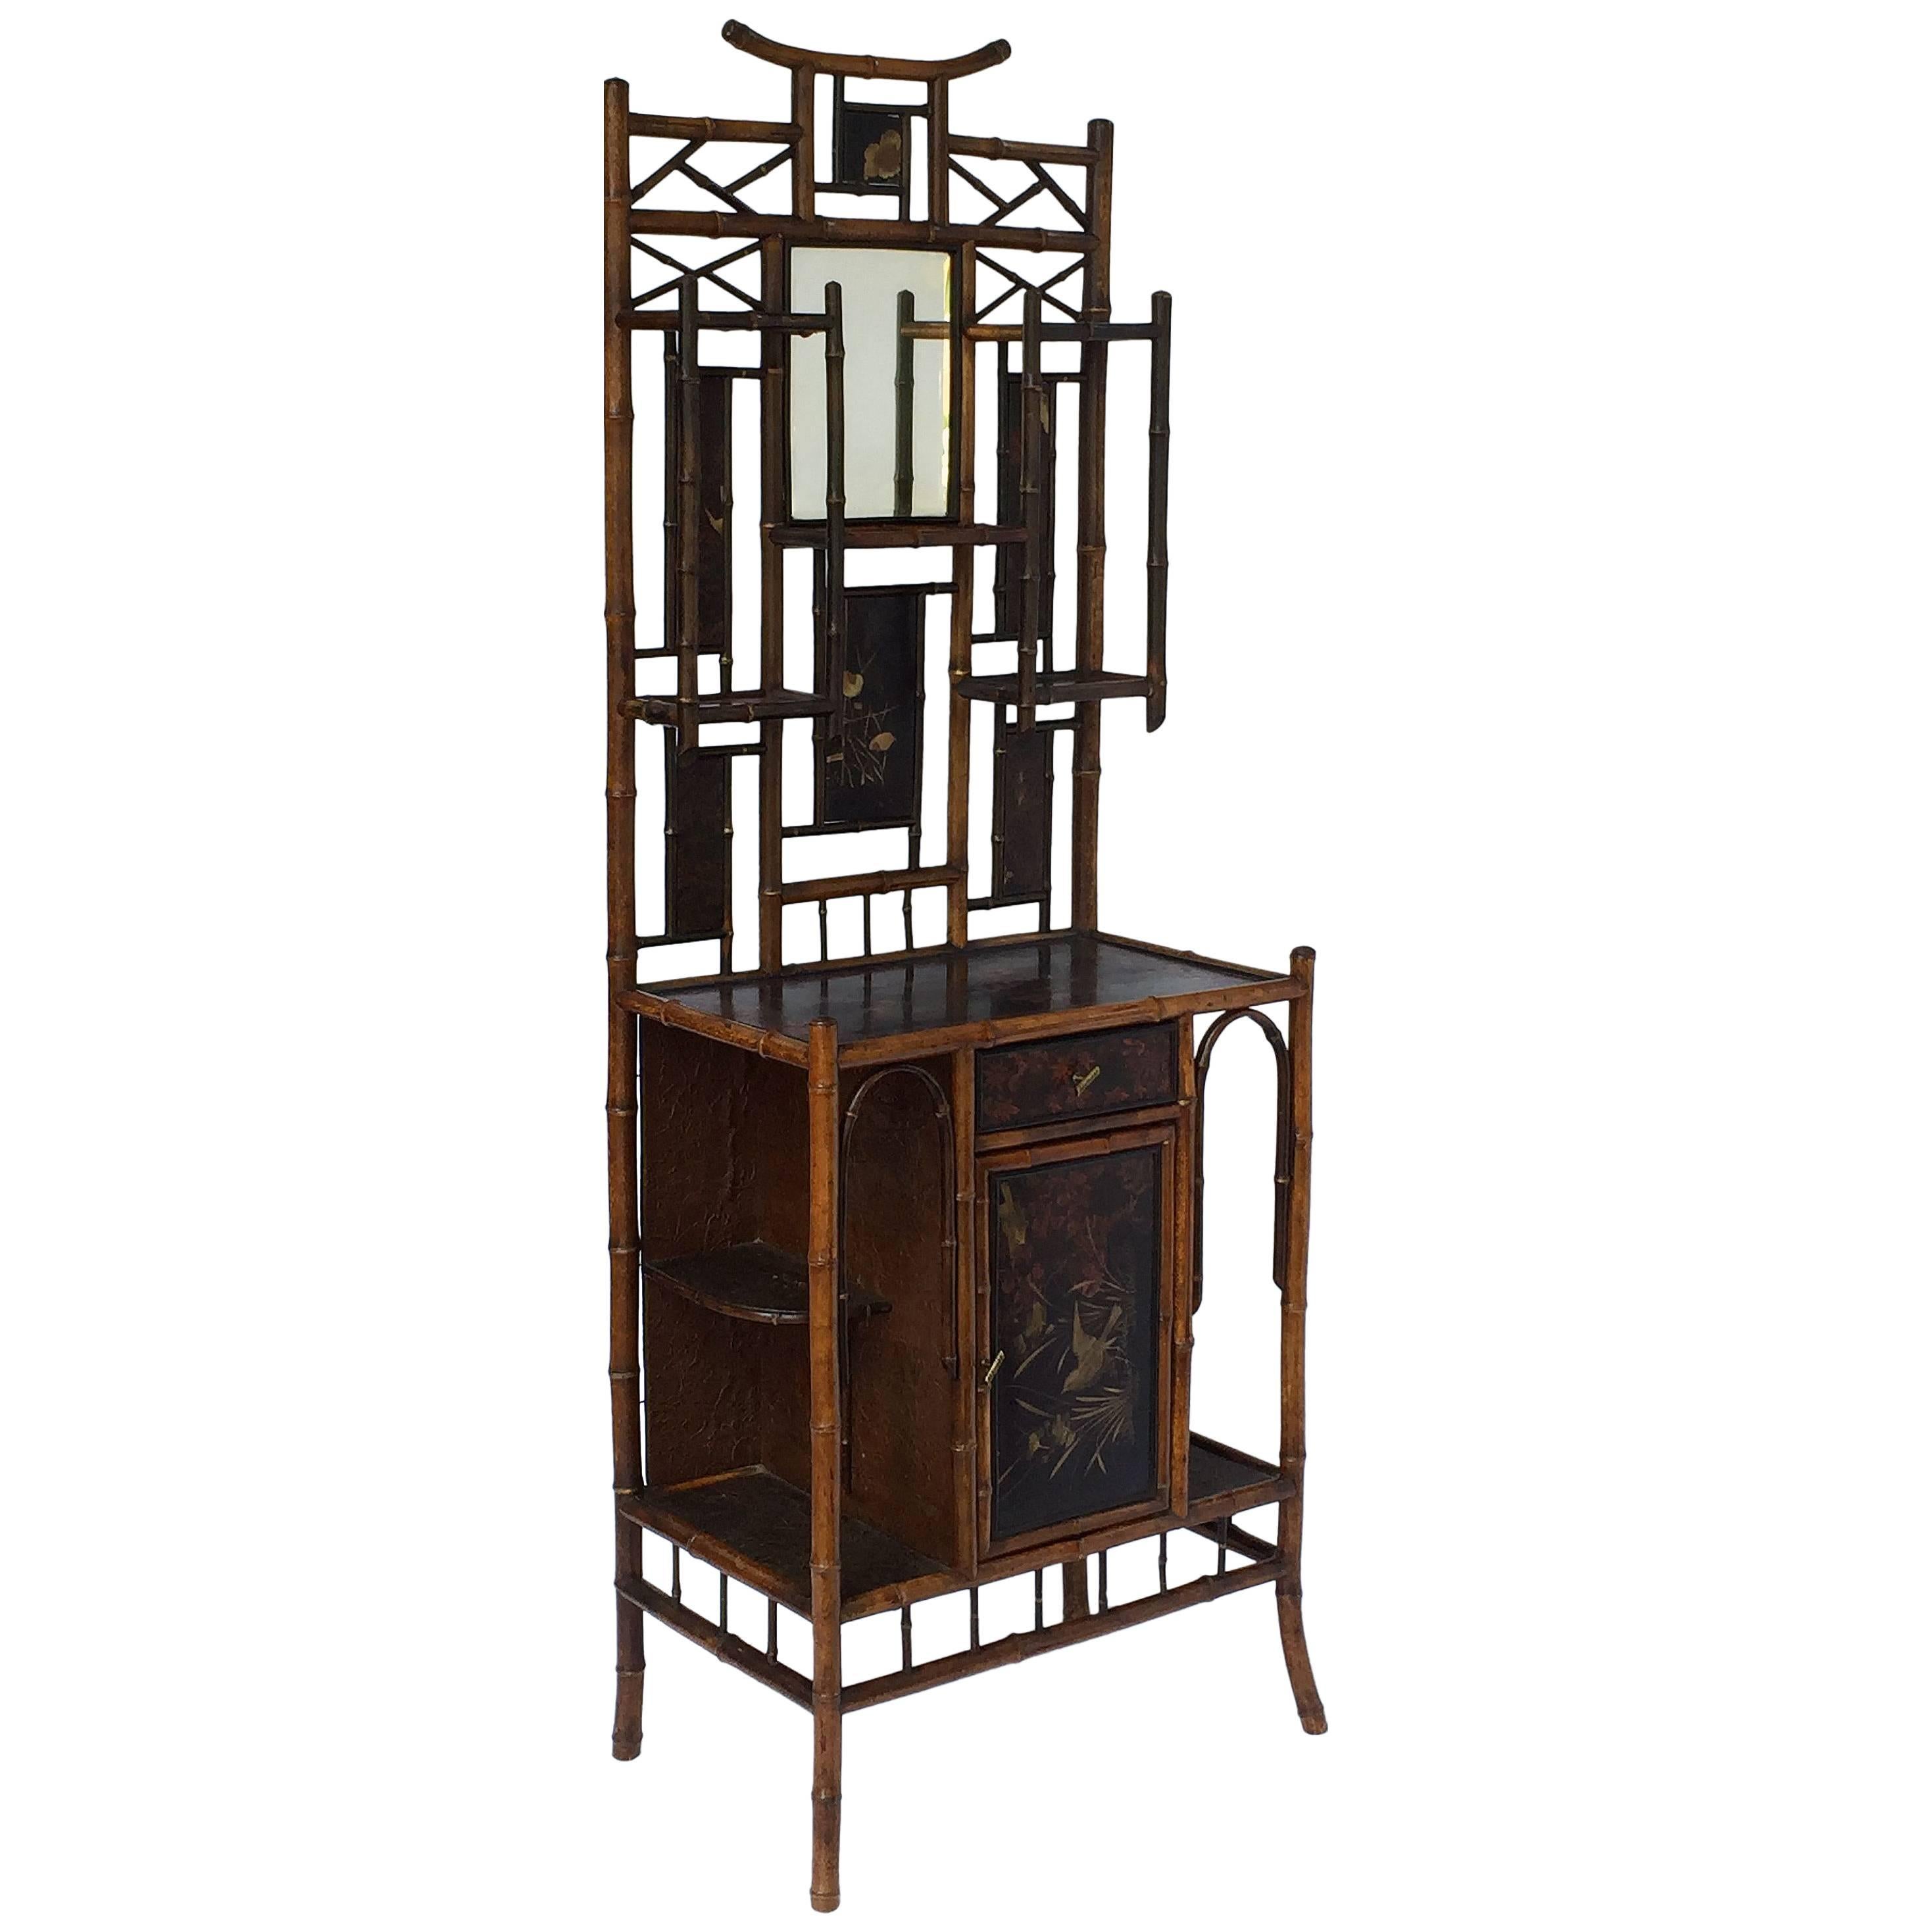 Large English Bamboo Lacquered Cabinet with Beveled Mirror and Door